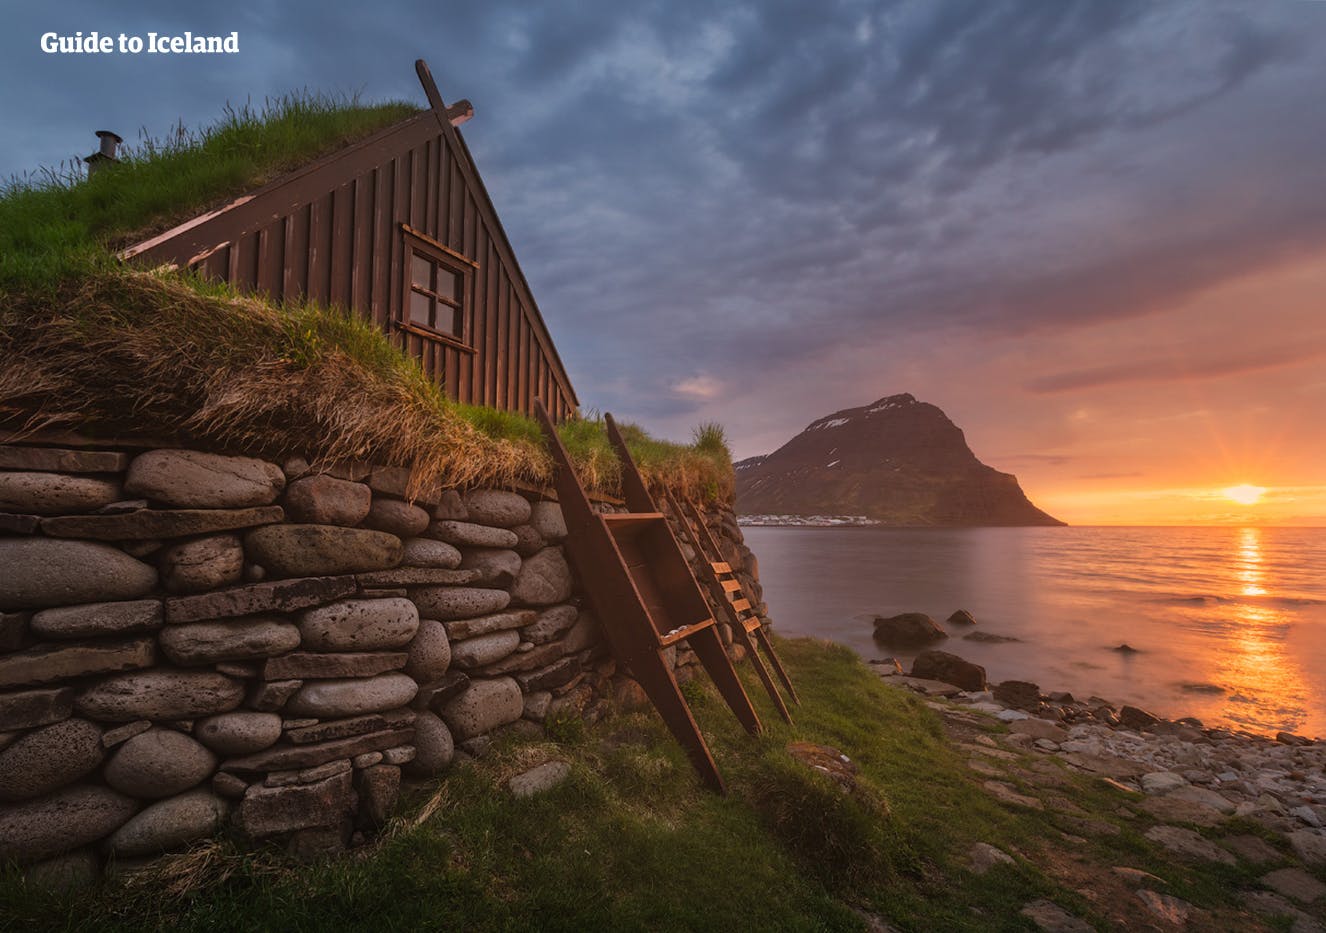 Turf houses in the Westfjords under the Midnight Sun.